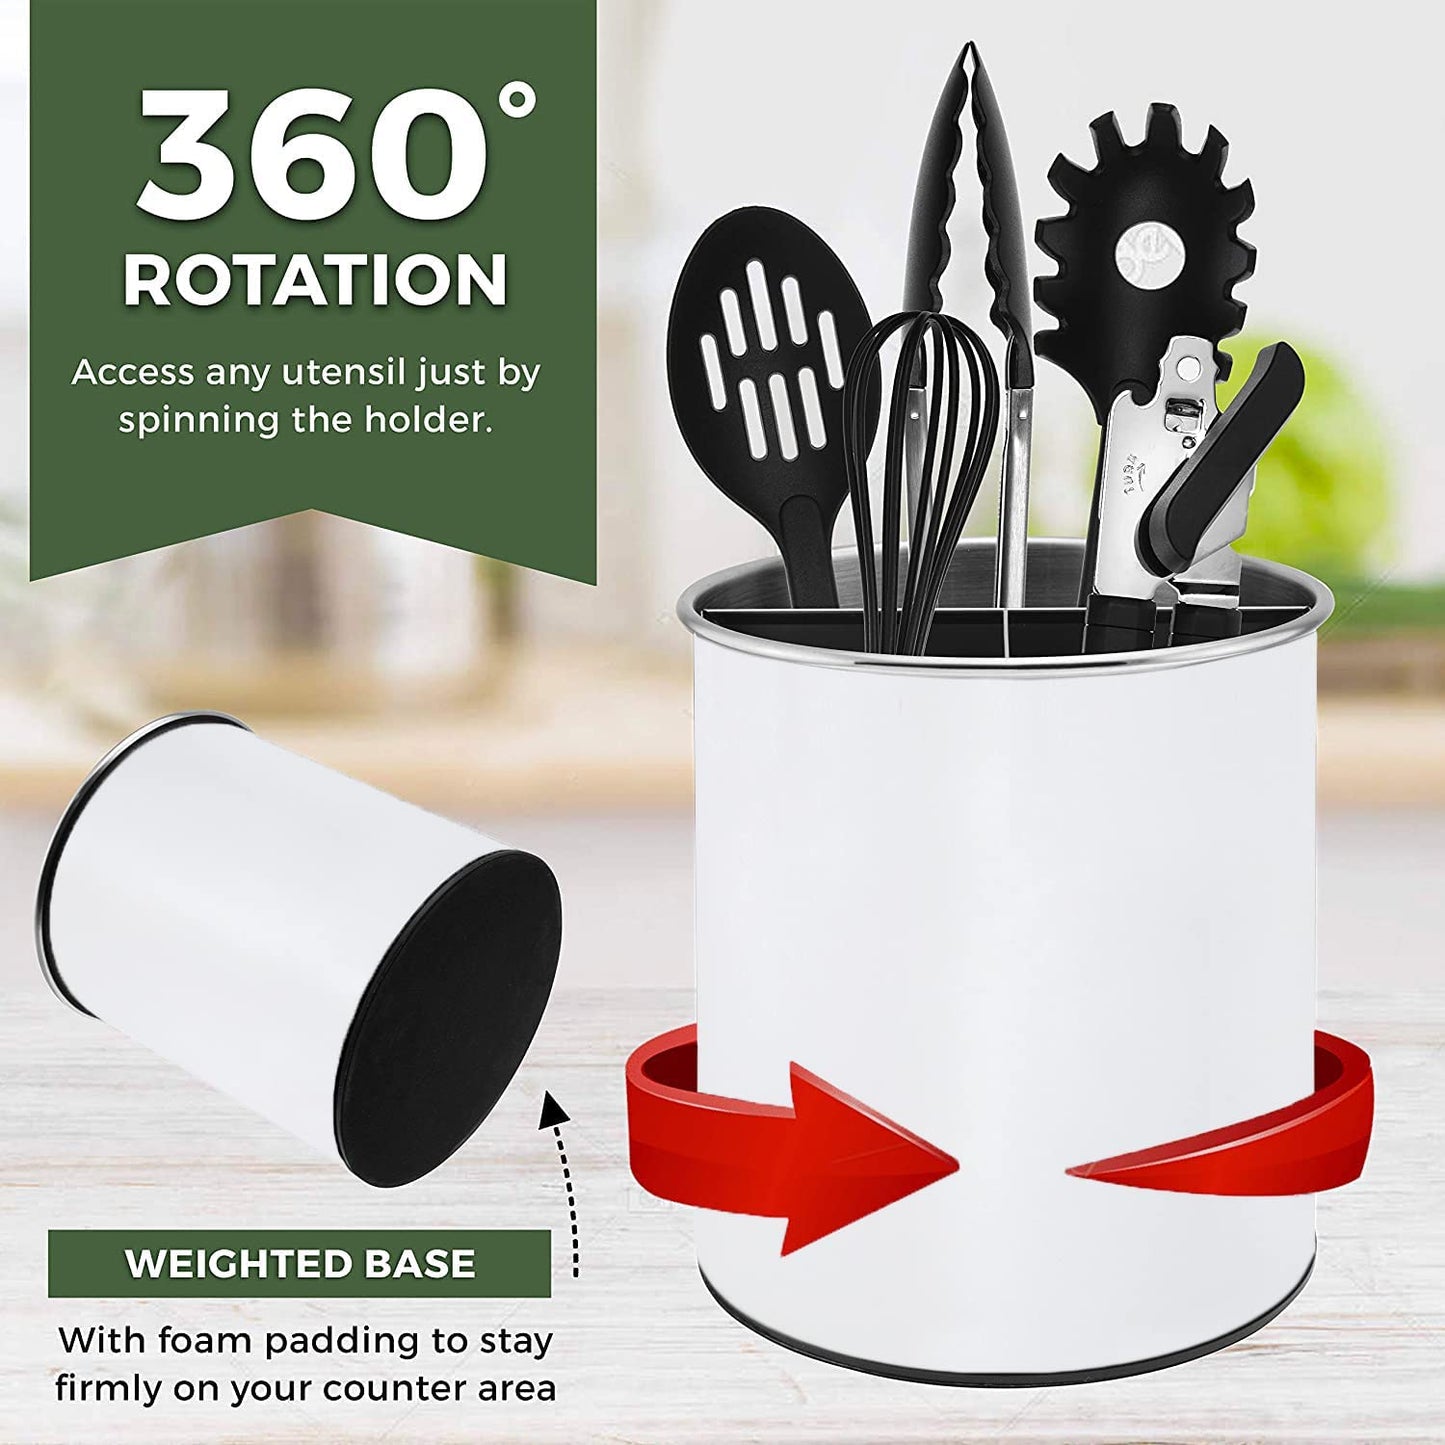 Bartnelli Extra Large Stainless Steel Kitchen Utensil Holder - 360° Rotating Utensil Caddy - Weighted Base for Stability - Countertop Organizer Crock With Removable Divider (COOL WHITE)